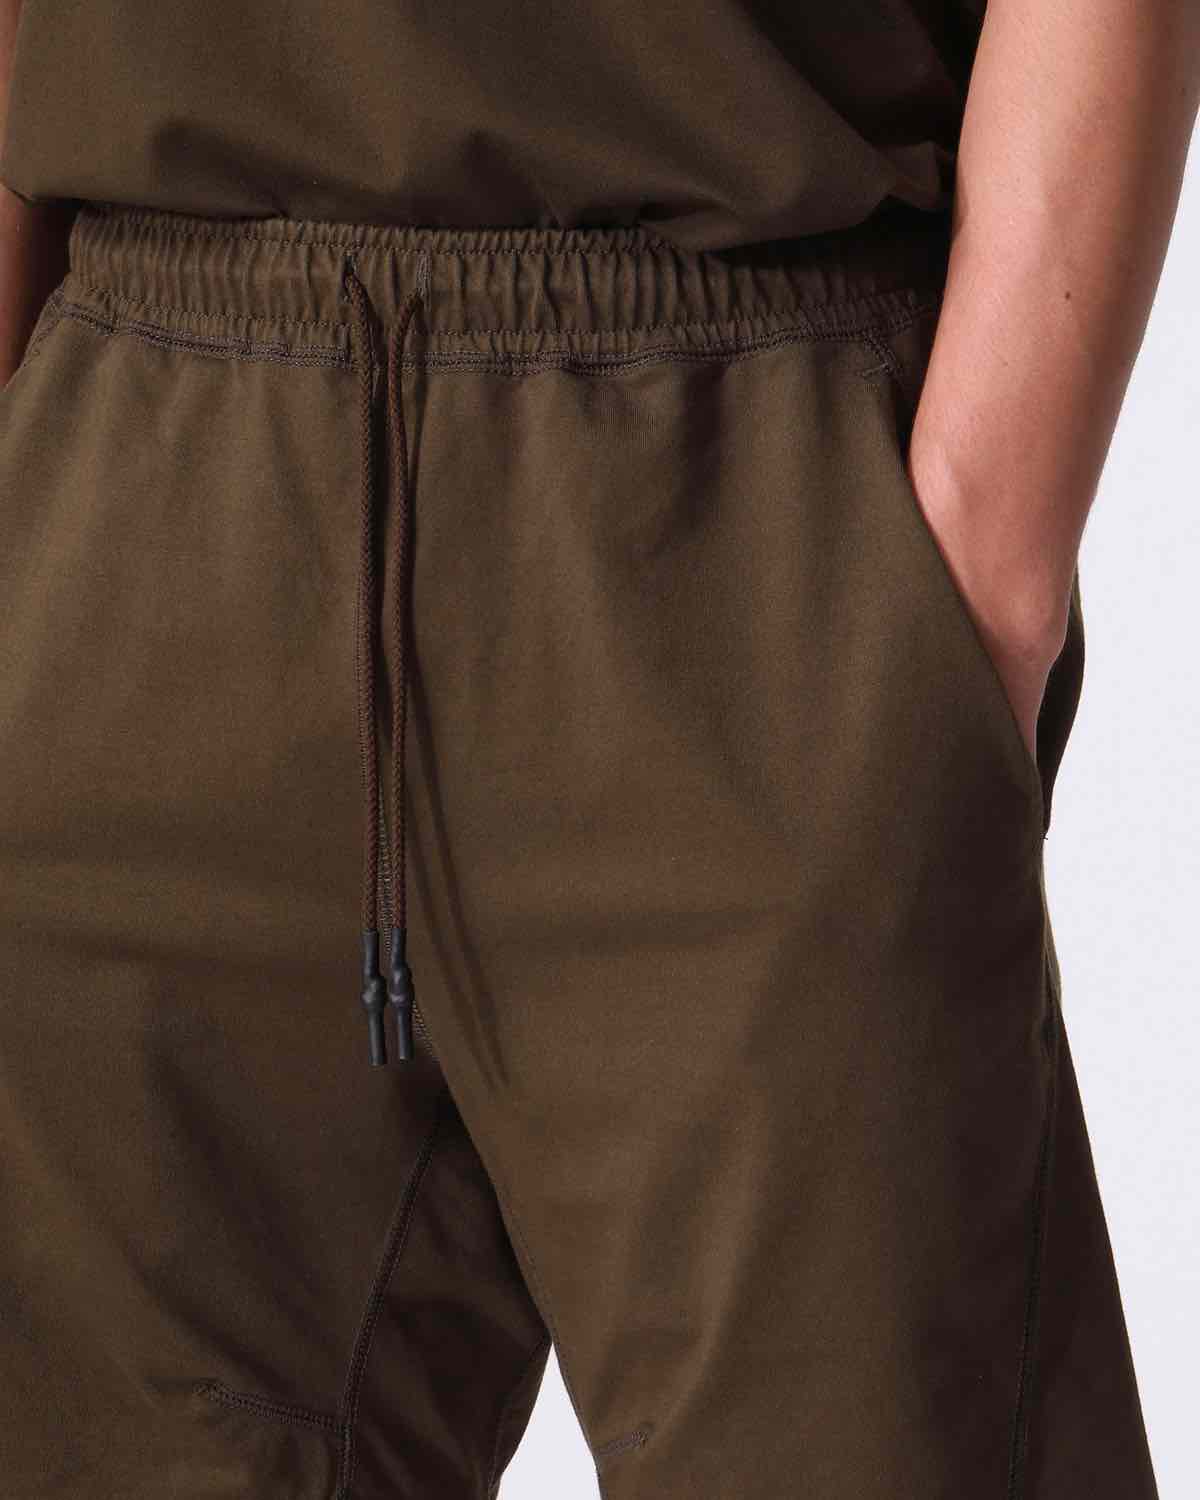 NONNATIVE JOGGER EASY SHORTS C/N JERSEY ICE PACK-OLIVE